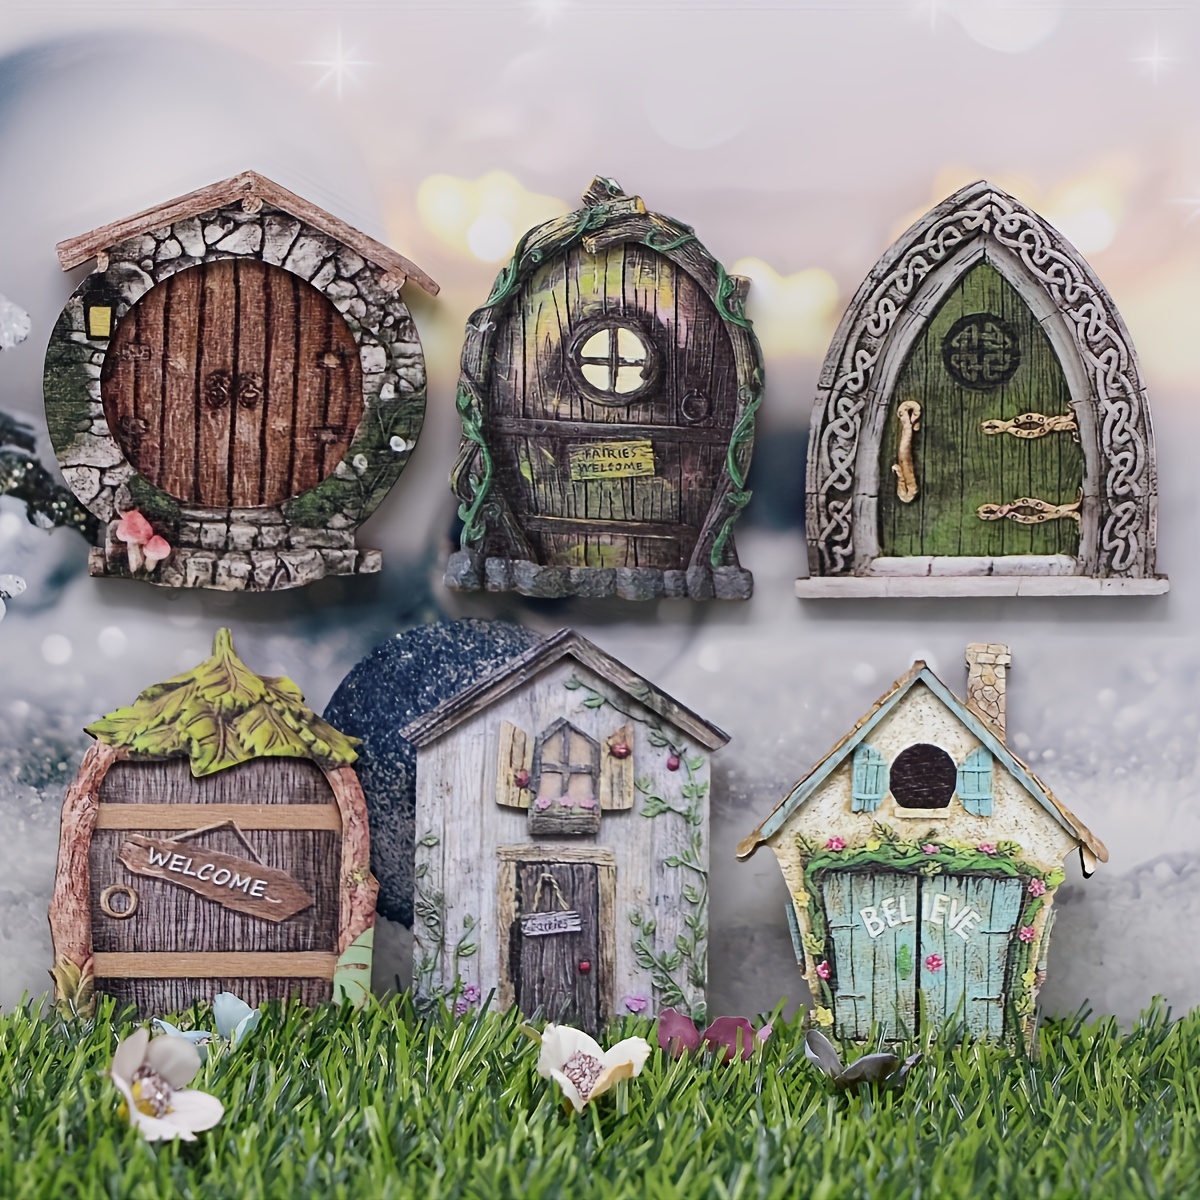 

6-piece Garden Fairy Gate Set - Wooden Miniature Gnome & Tree Decorations For Yard And Patio